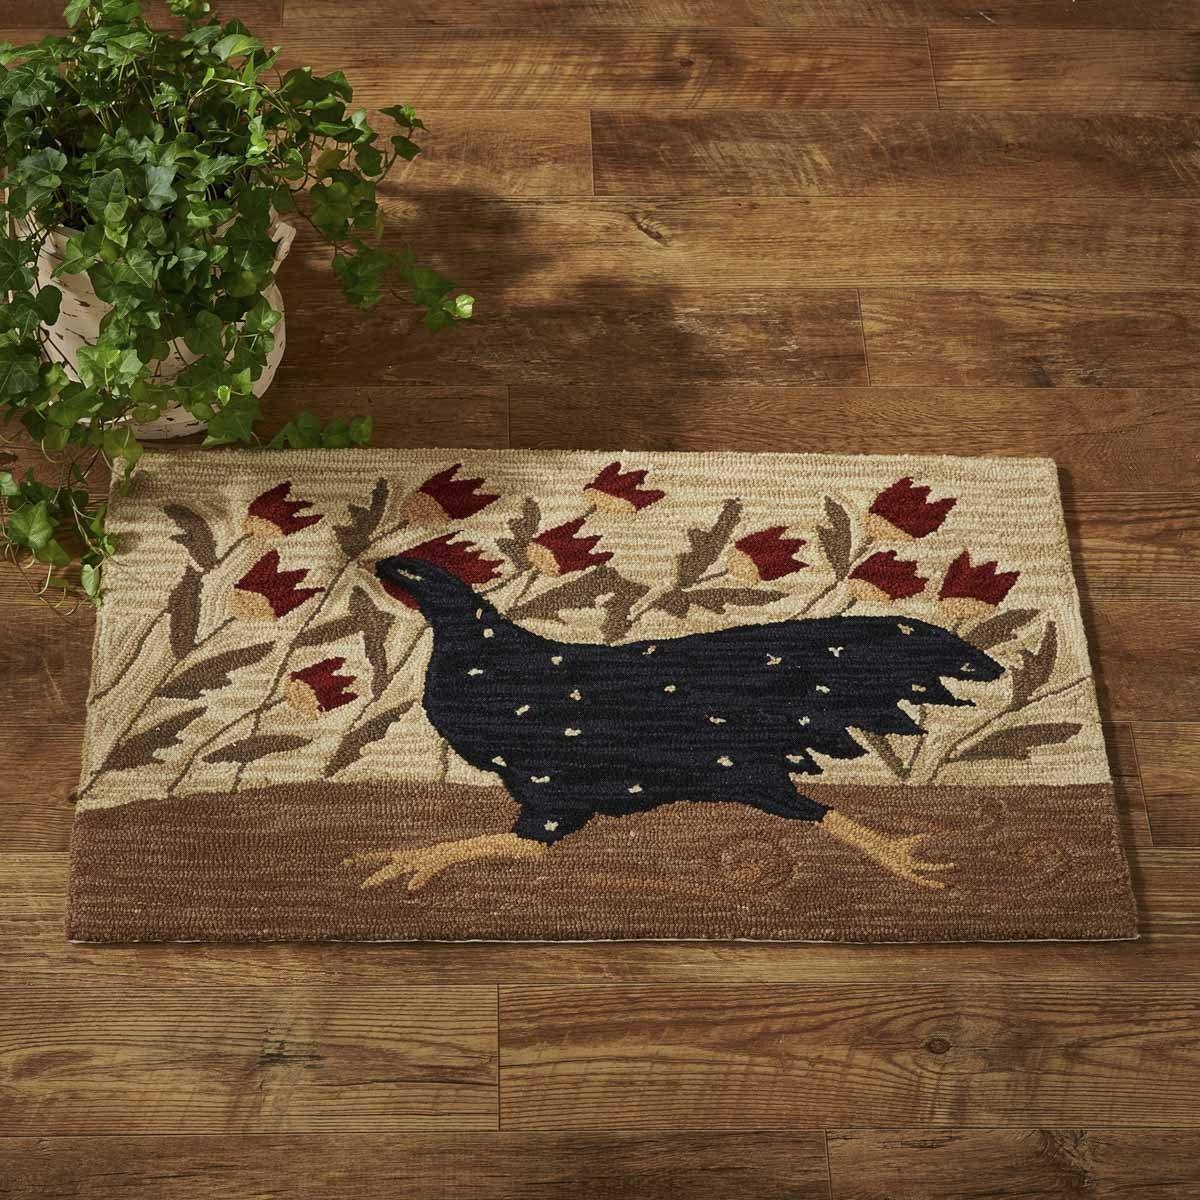 Chicken Run Rooster Hooked Rug 2'x3' (24